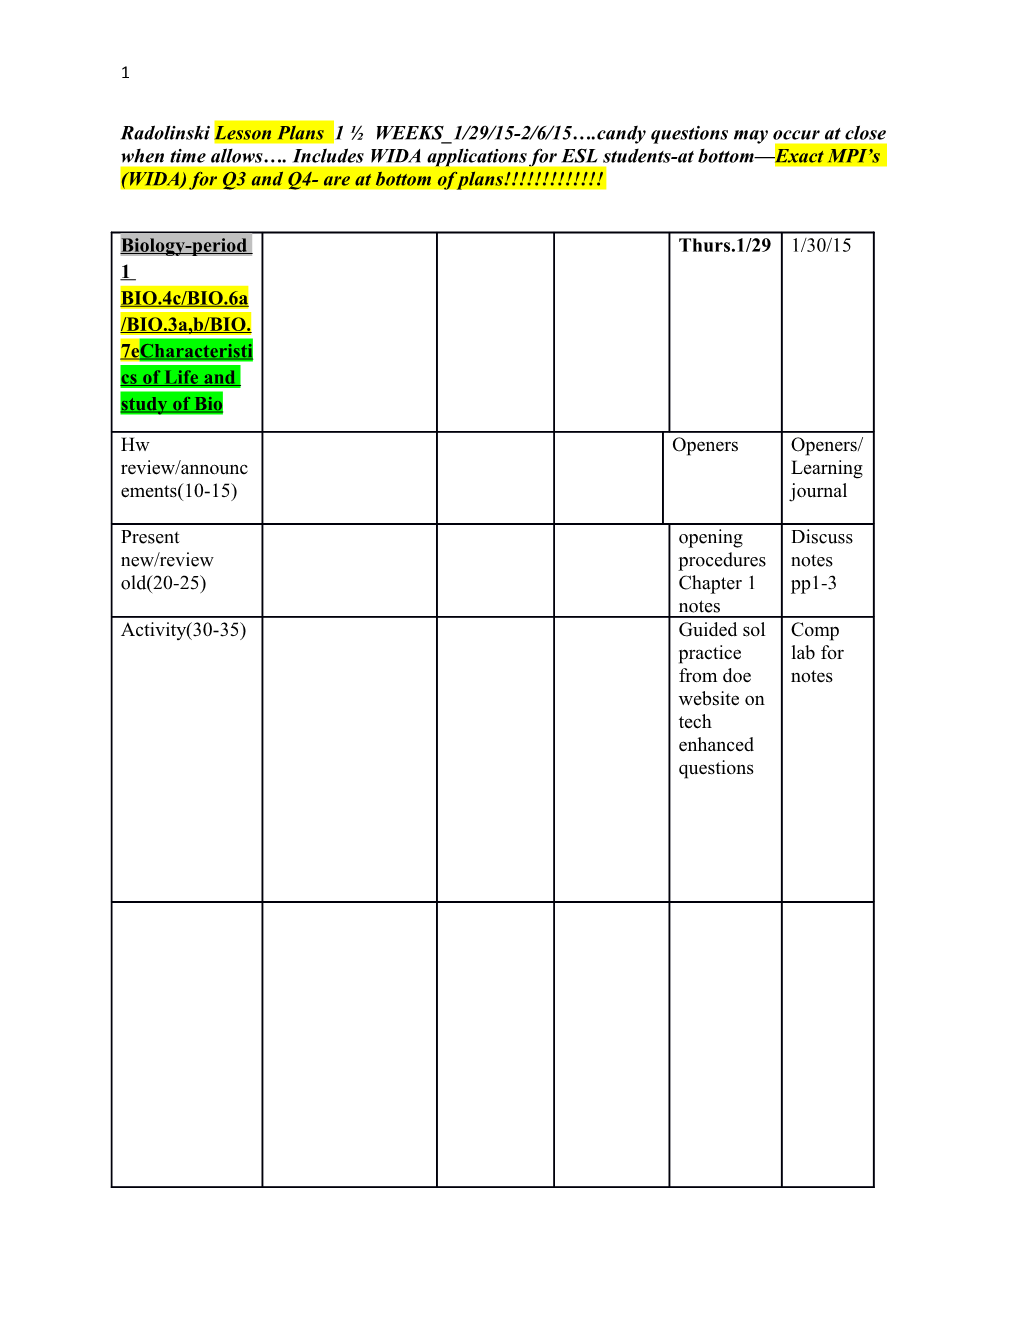 WIDA MPI S for Q1-All Standard 4-Level 3 and 4/Vocab in Bold/Q2